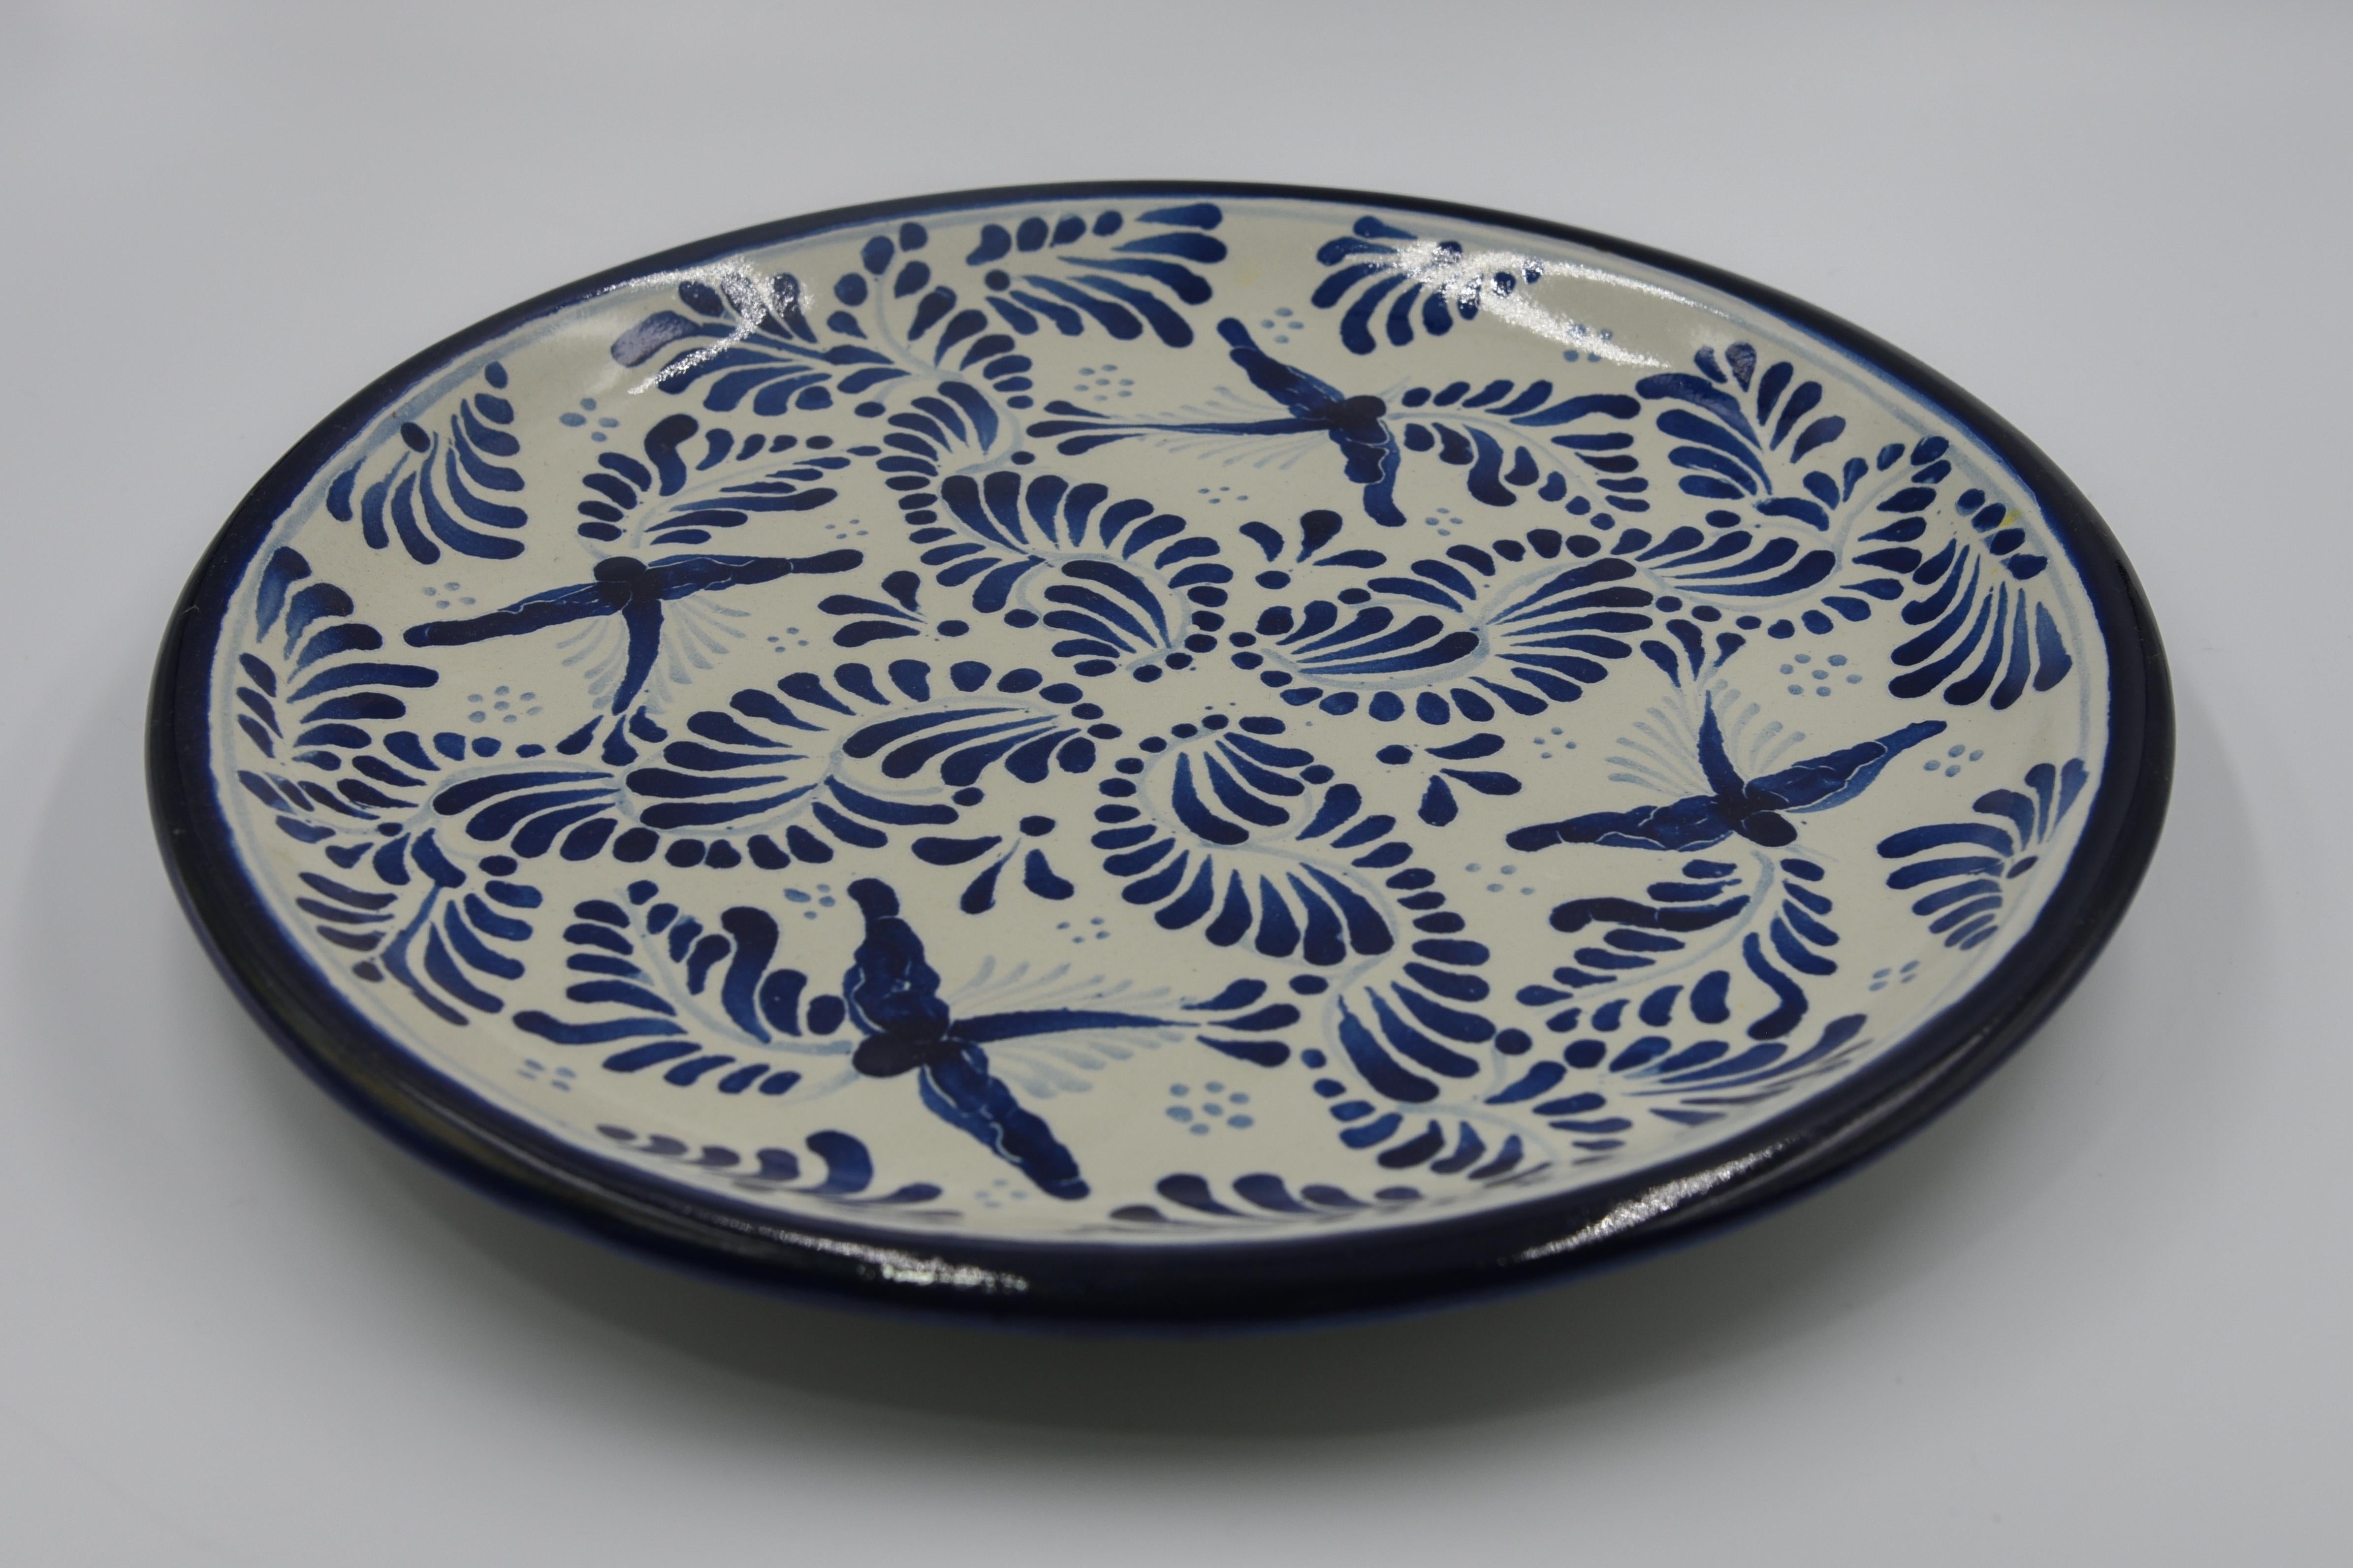 This decorative Talavera plate is a contemporary example of Talavera today. Artist Cesar Torres unmasks the past and portraits the present in a vide-poche -- rustic Mexican elegance. 

The Talavera is not just a simple painted ceramic: its exquisite